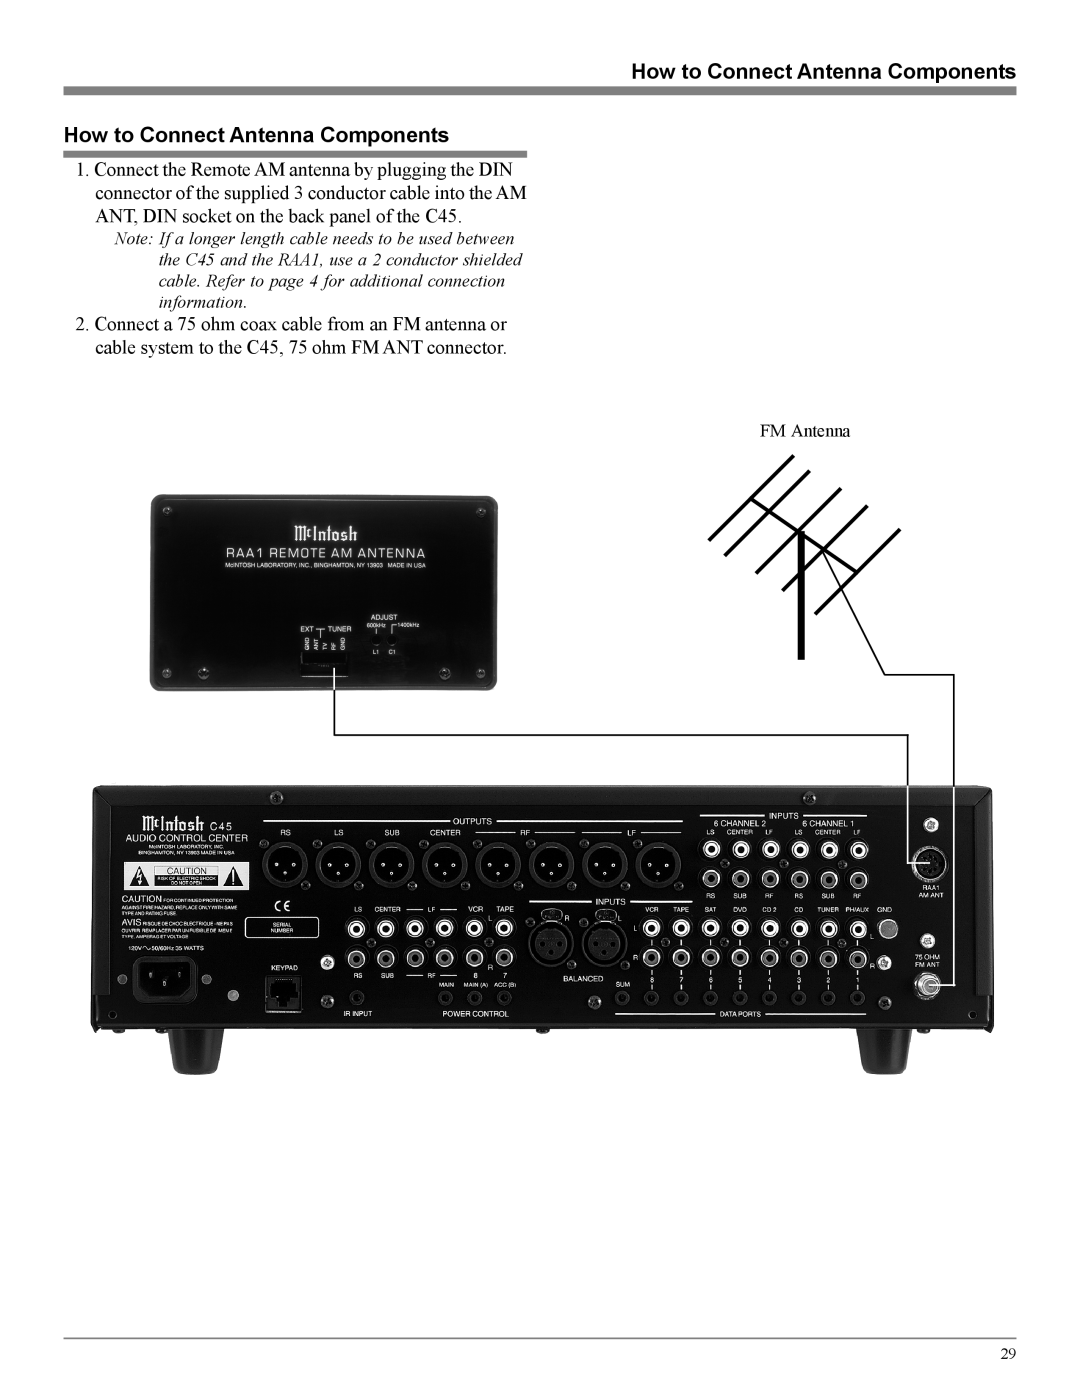 McIntosh C45 owner manual How to Connect Antenna Components, FM Antenna 